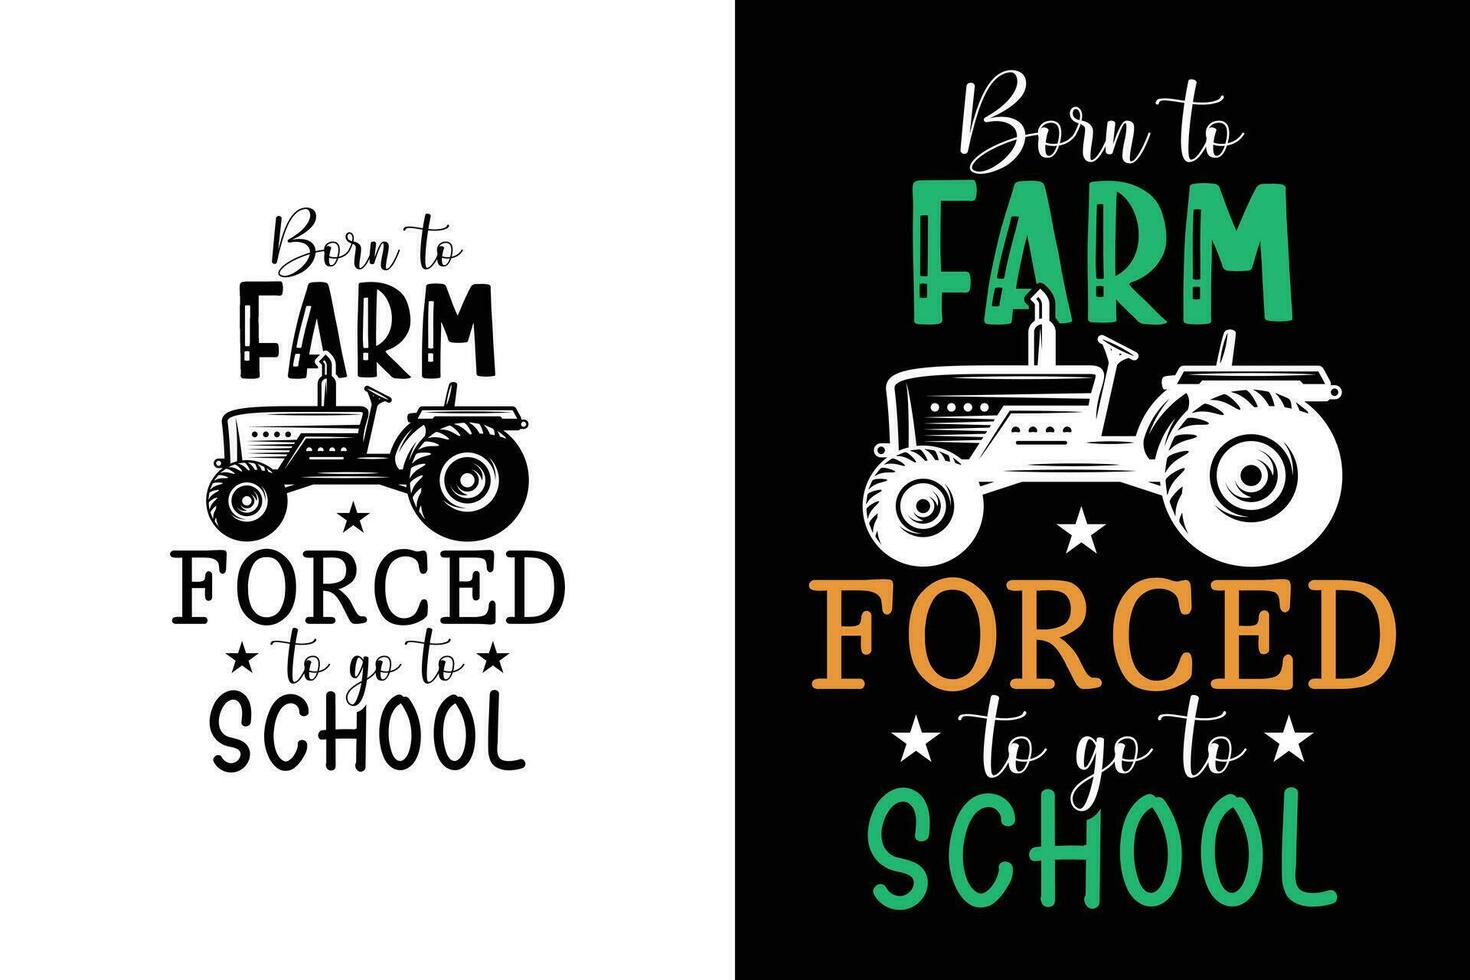 Born to farm forced to go to school Funny Farming Lawn Mower Agriculture T-shirt vector